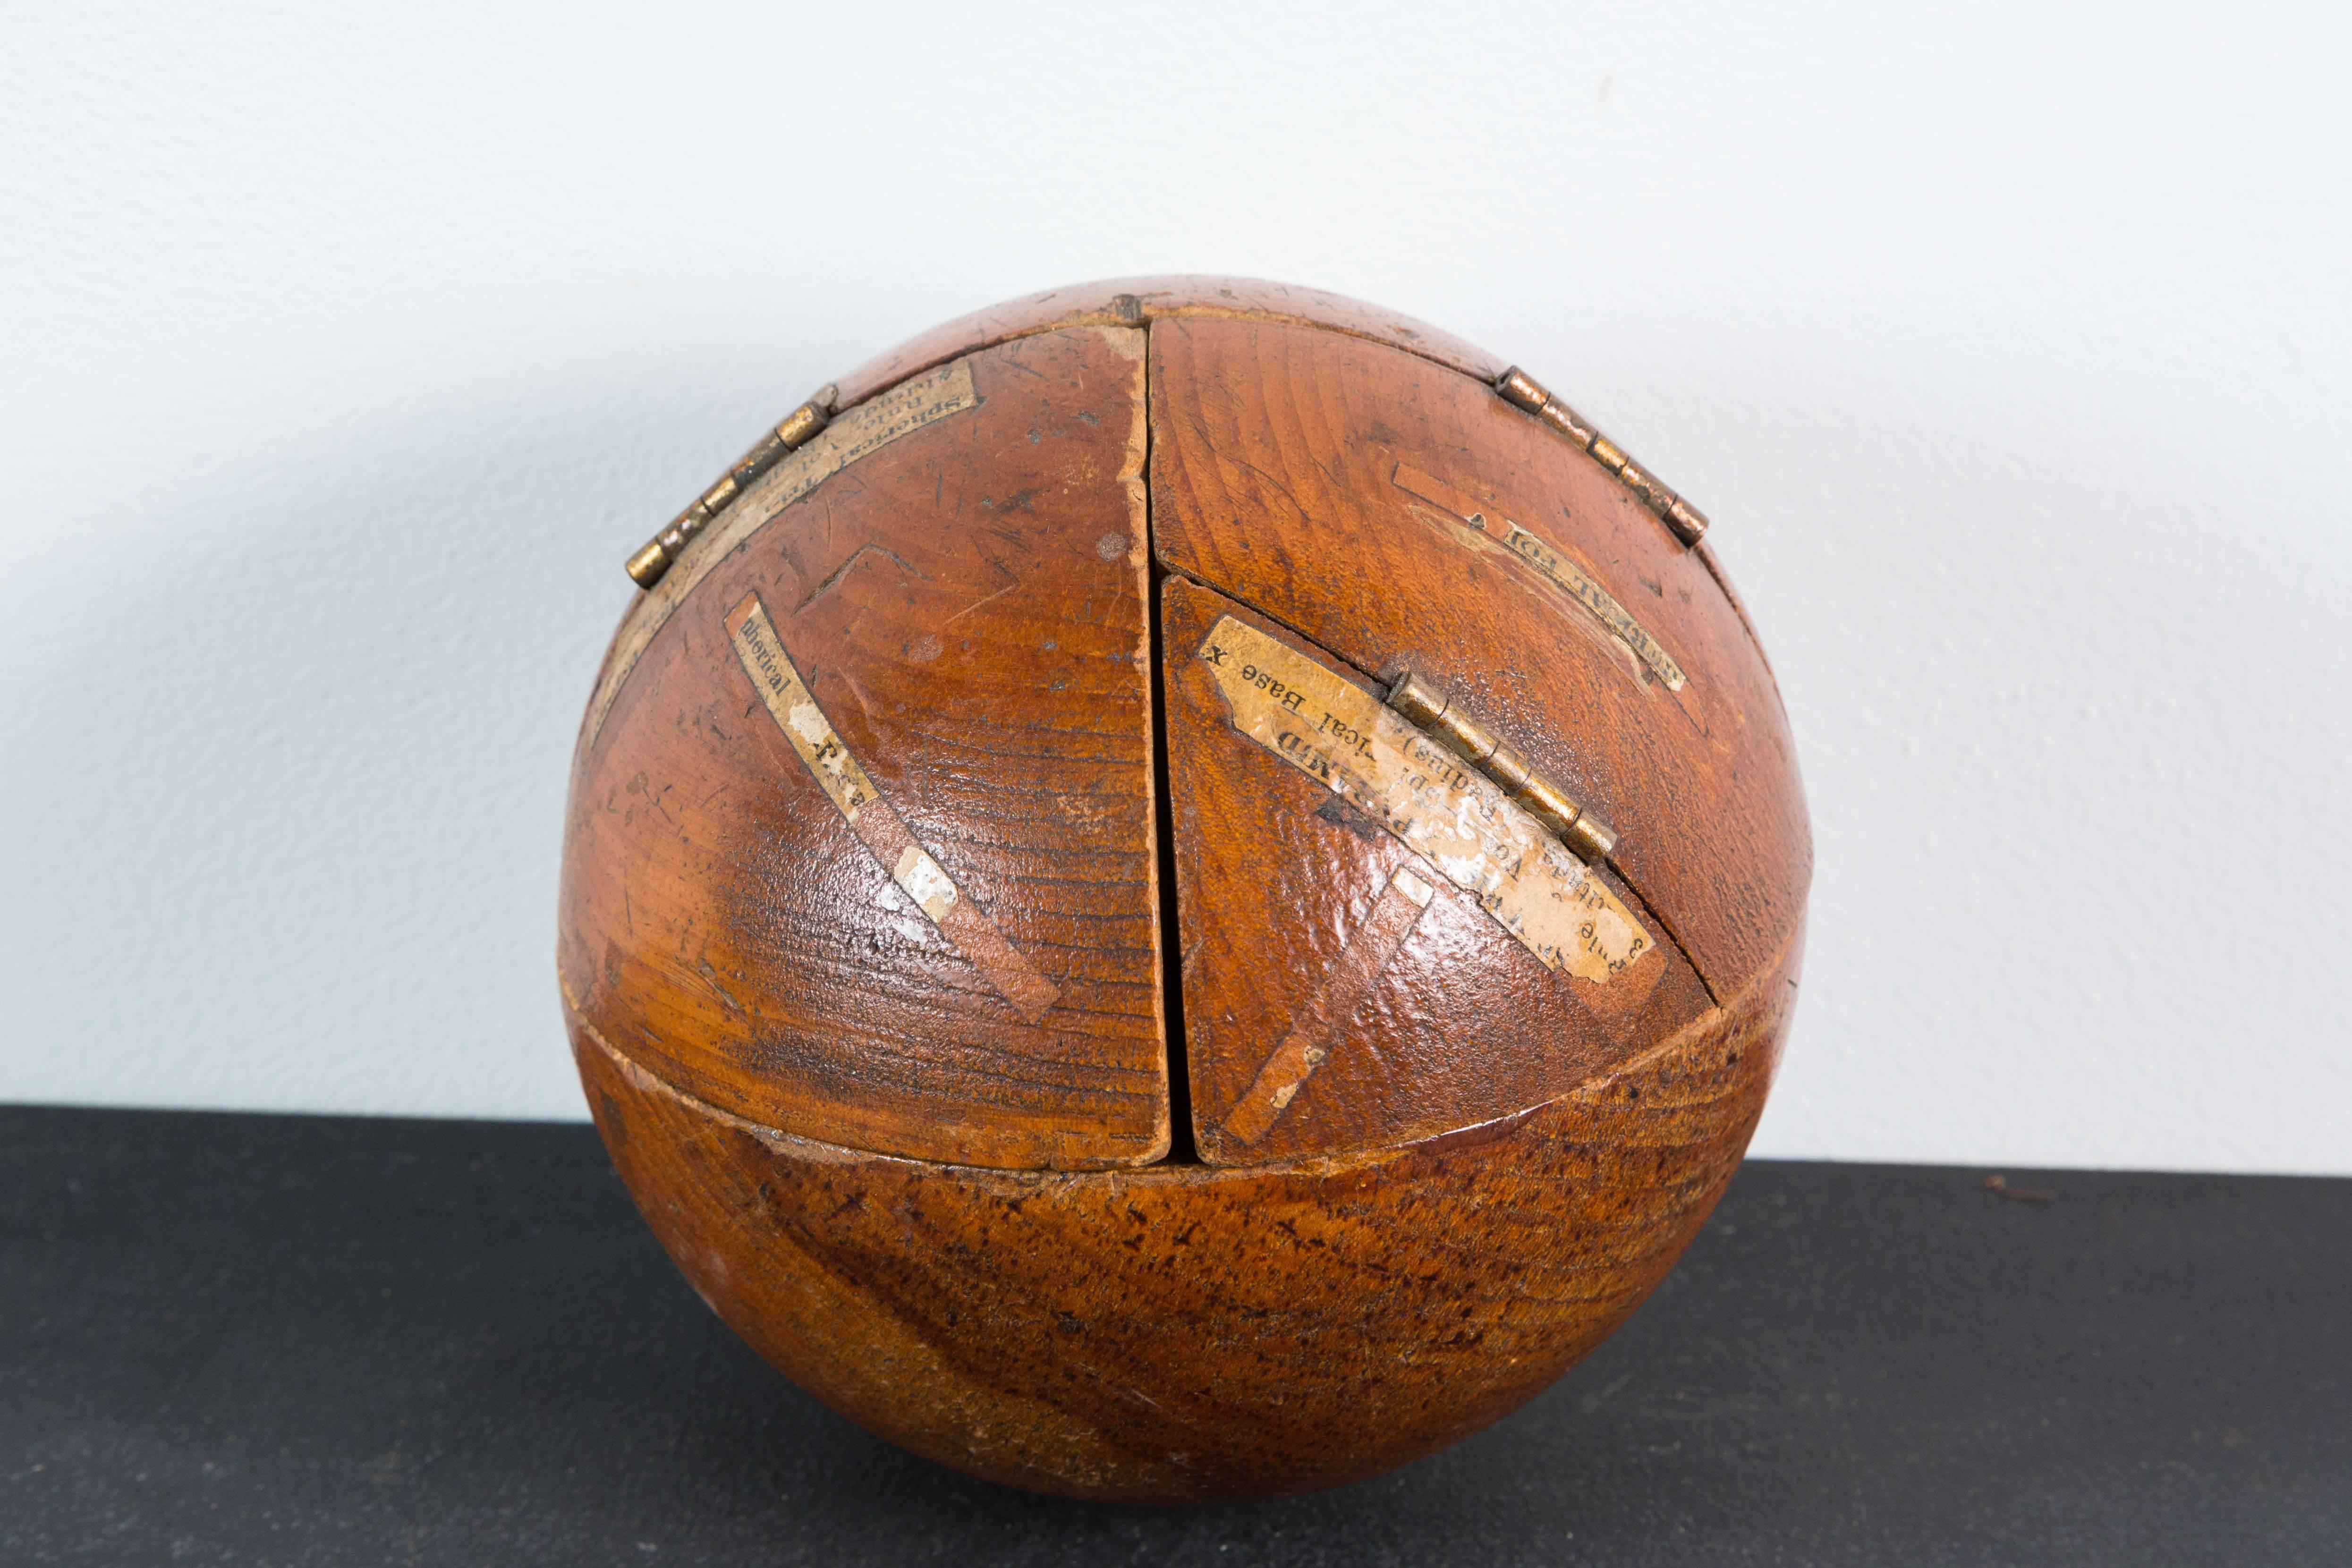 Fantastic multidimensional geometry teaching sphere. Wonderful warm patina to wood surface. Original notes displayed on the sphere and inside. Opens up to many different shapes and options.